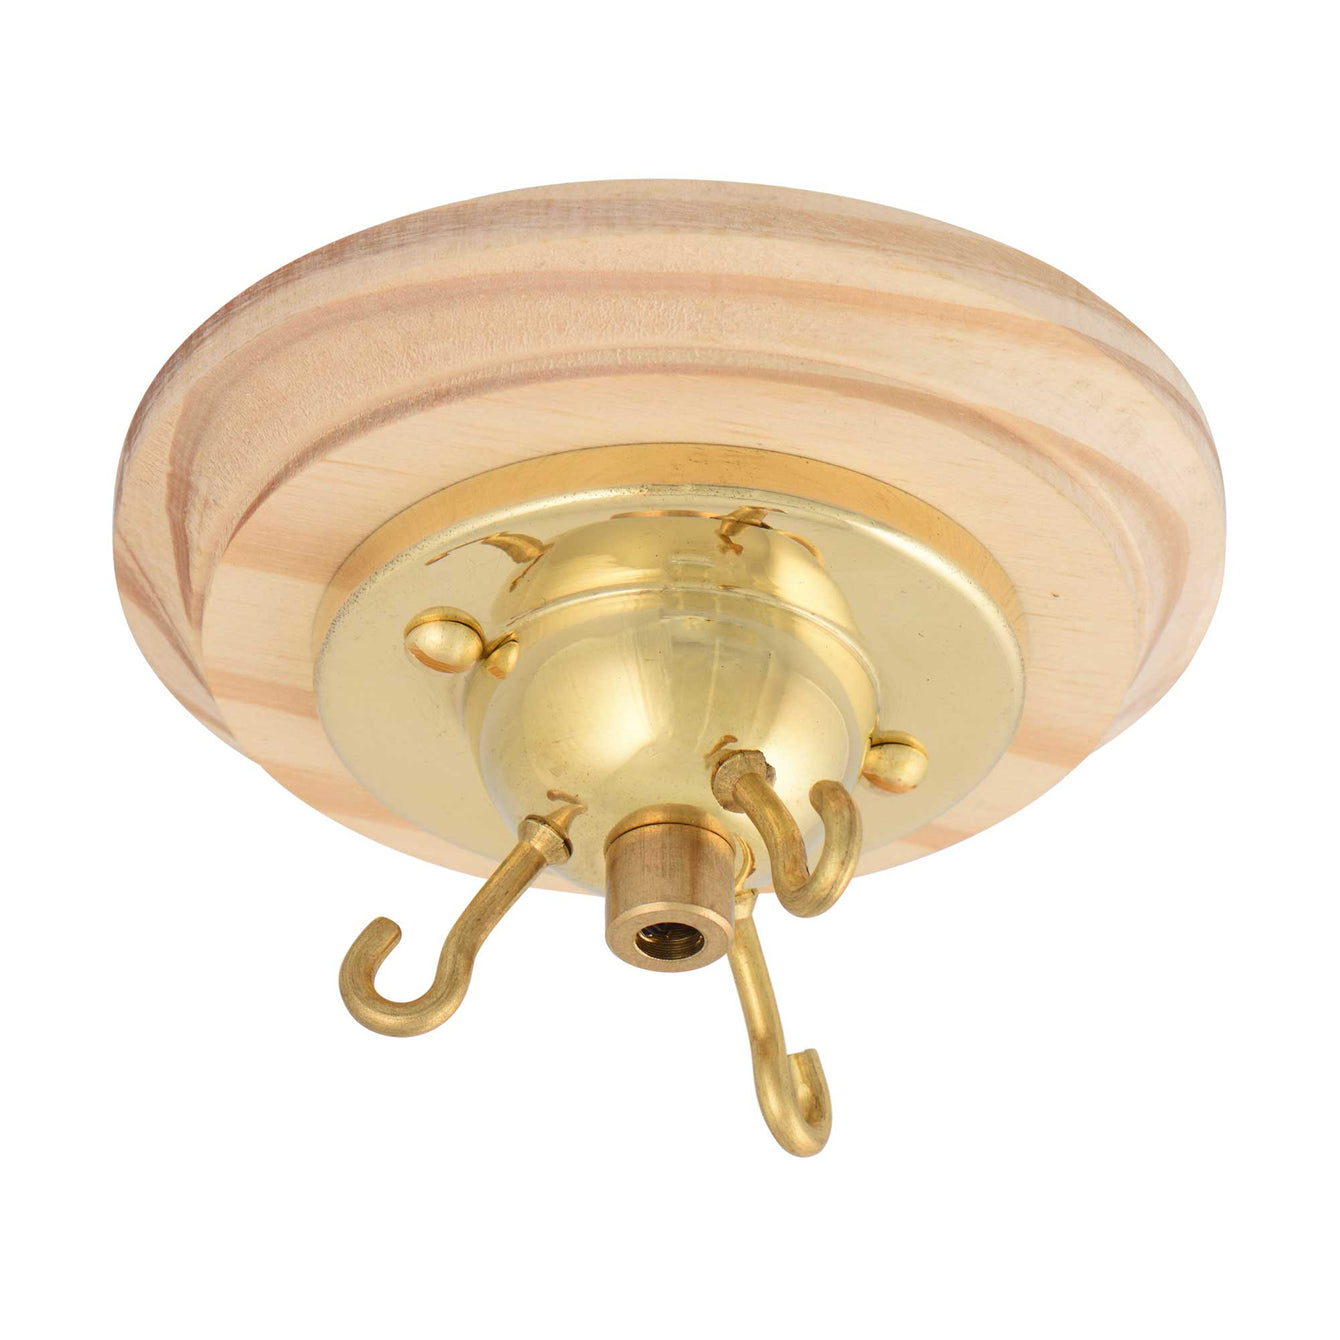 ElekTek 3 Hook Ceiling Rose Kit With Matching Screws Cord Grip and Pine Ceiling Pattress Metallic Finishes Chrome